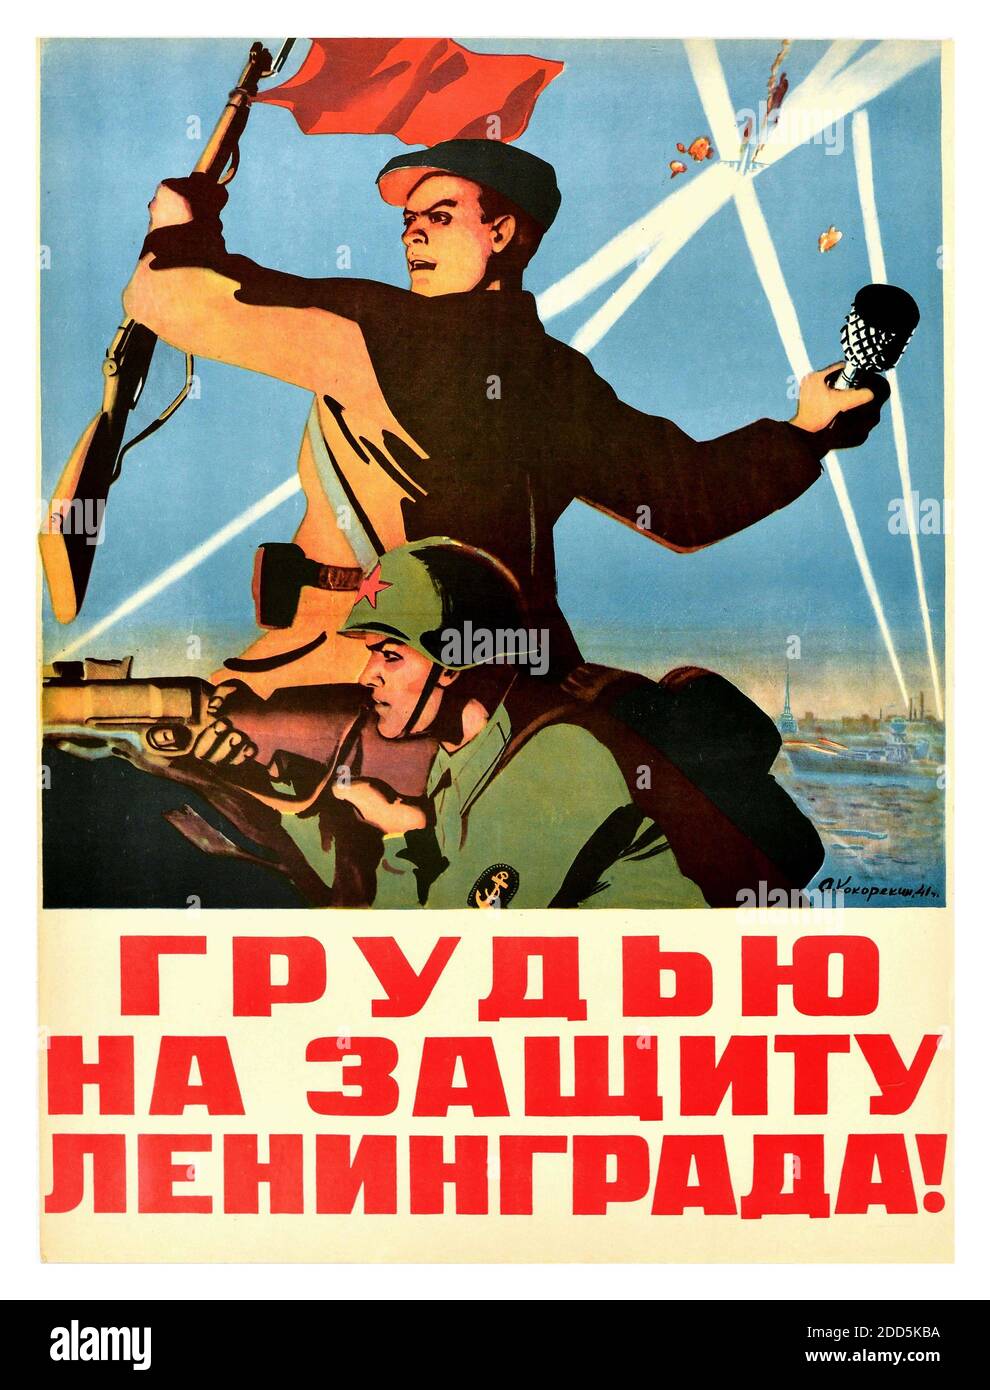 DEFENDING LENINGRAD Vintage 1940's official WW2 Soviet Russia Government  propaganda poster 'Braced to Defend Leningrad ! ' artwork features two Soviet soldiers - One throwing a grenade and waving a red flag from his bayonet and the other aiming a rifle with spotlights shining in the sky in the background.  : Russia, designer: A. Kokorekin, 1940’s World War II Second World War Stock Photo